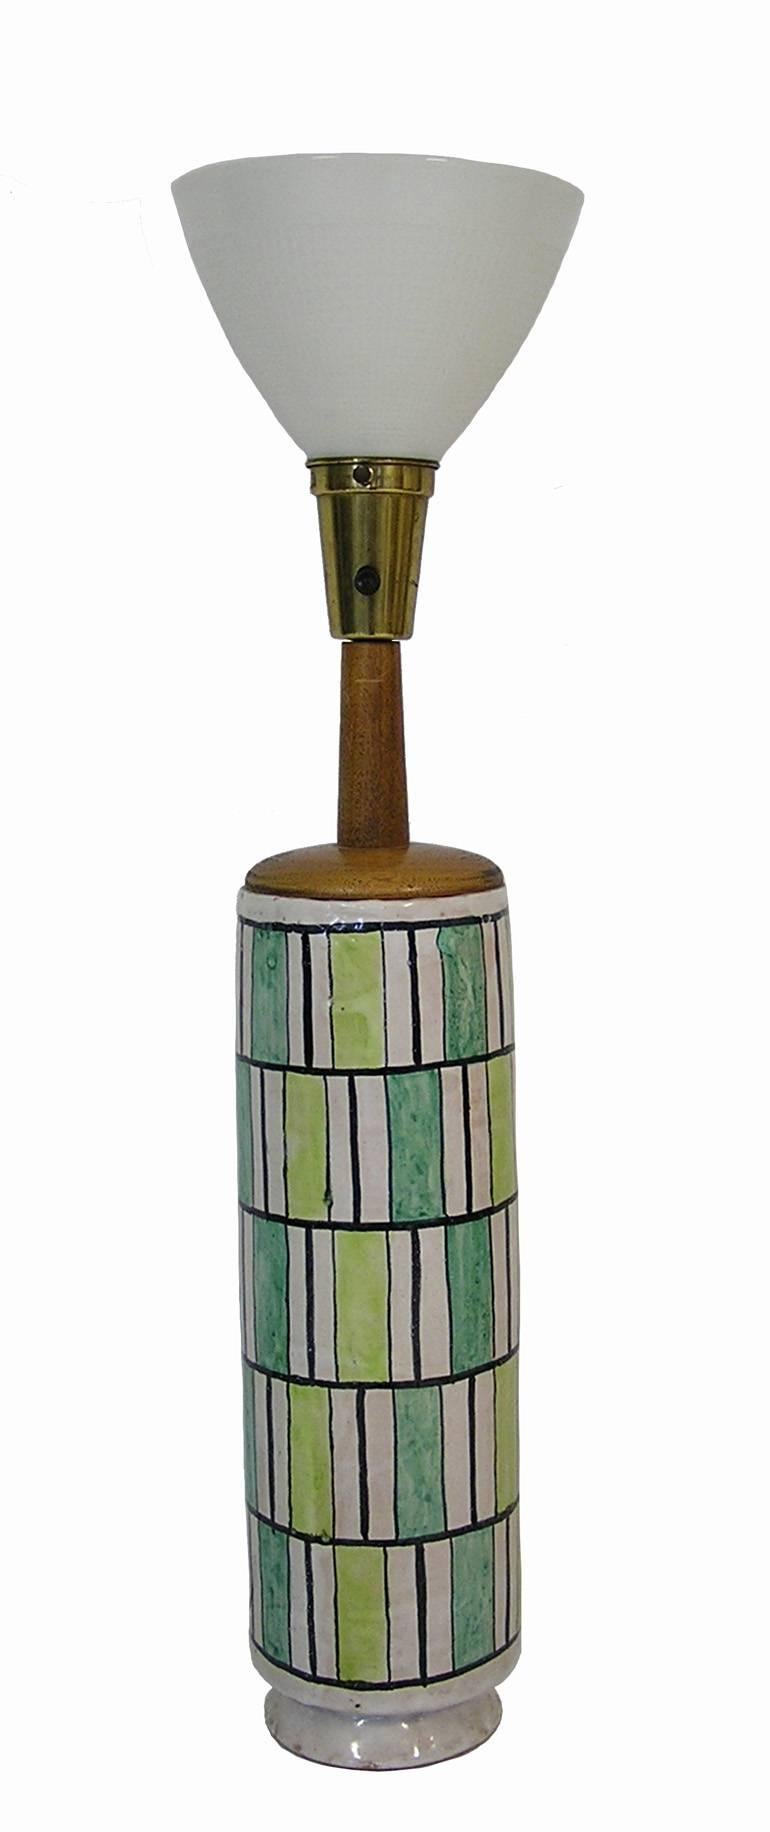 A gorgeous pair of Italian ceramic earthenware table lamps designed by Raymor of Italy, circa 1950s. These lamps are large and impressive, real stunners. Each features a two tone green color palette framed with black borders, a three way switch and